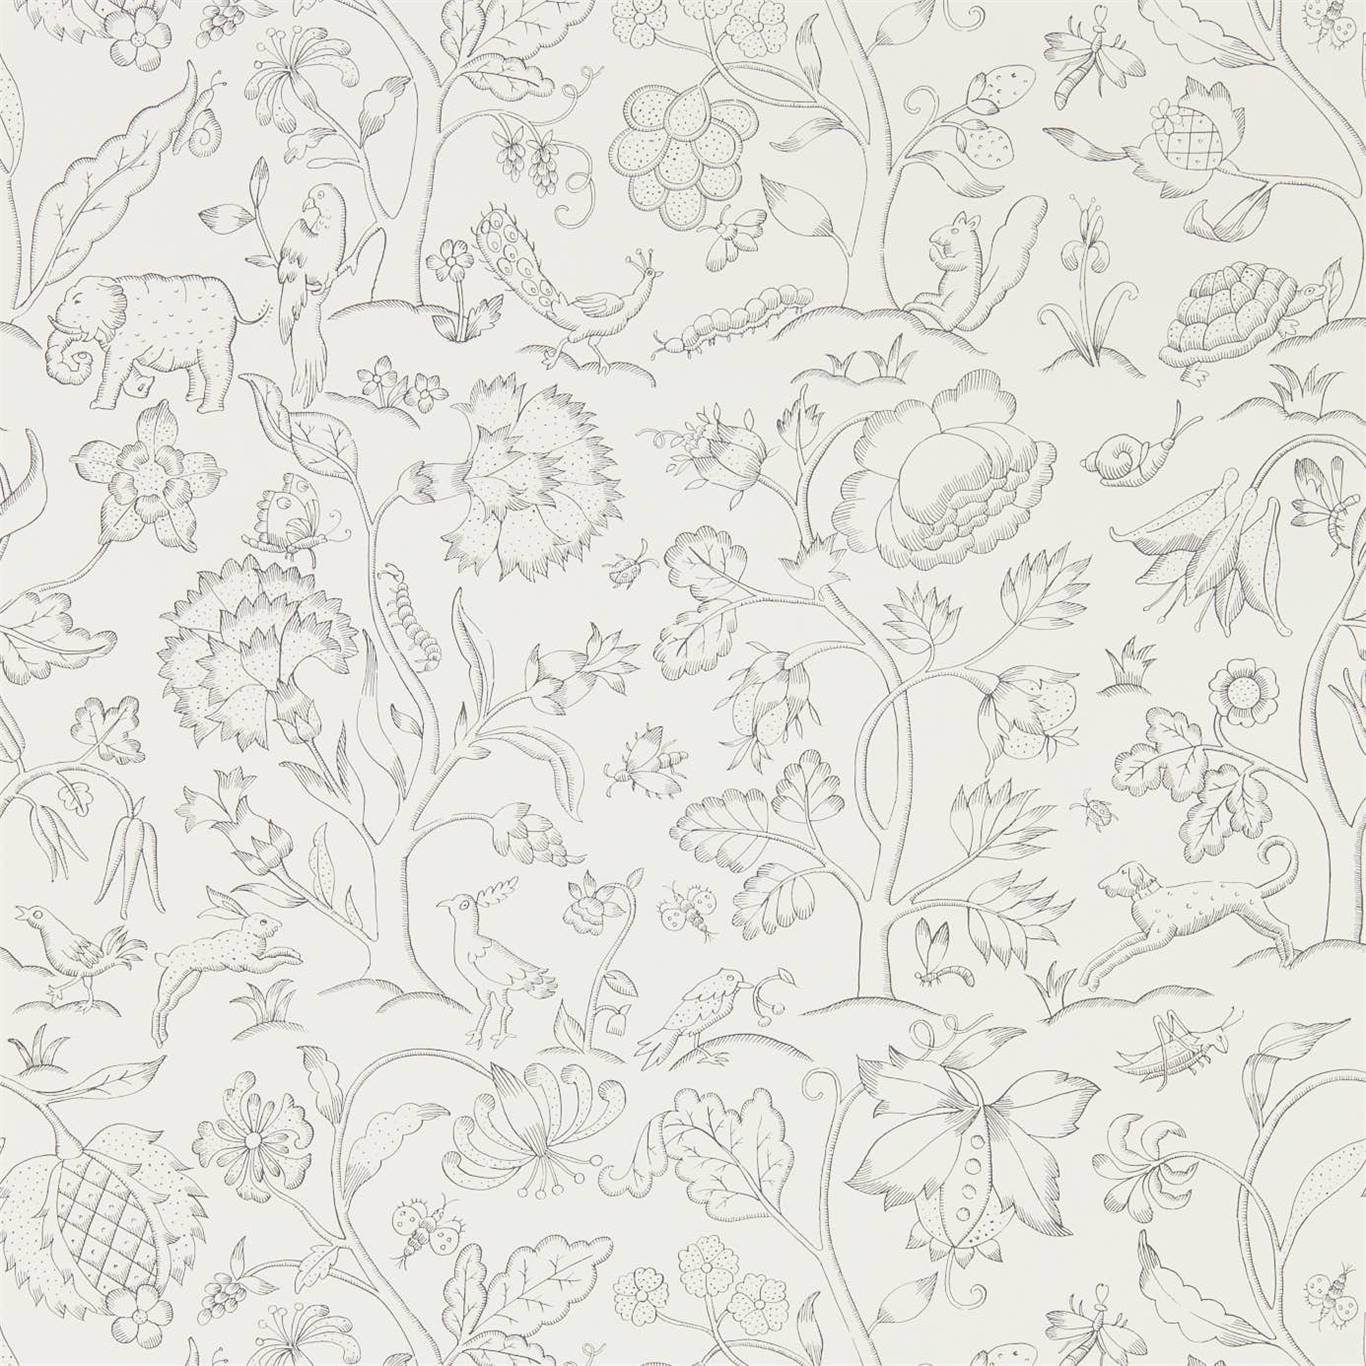 Middlemore Wallpaper by Morris & Co